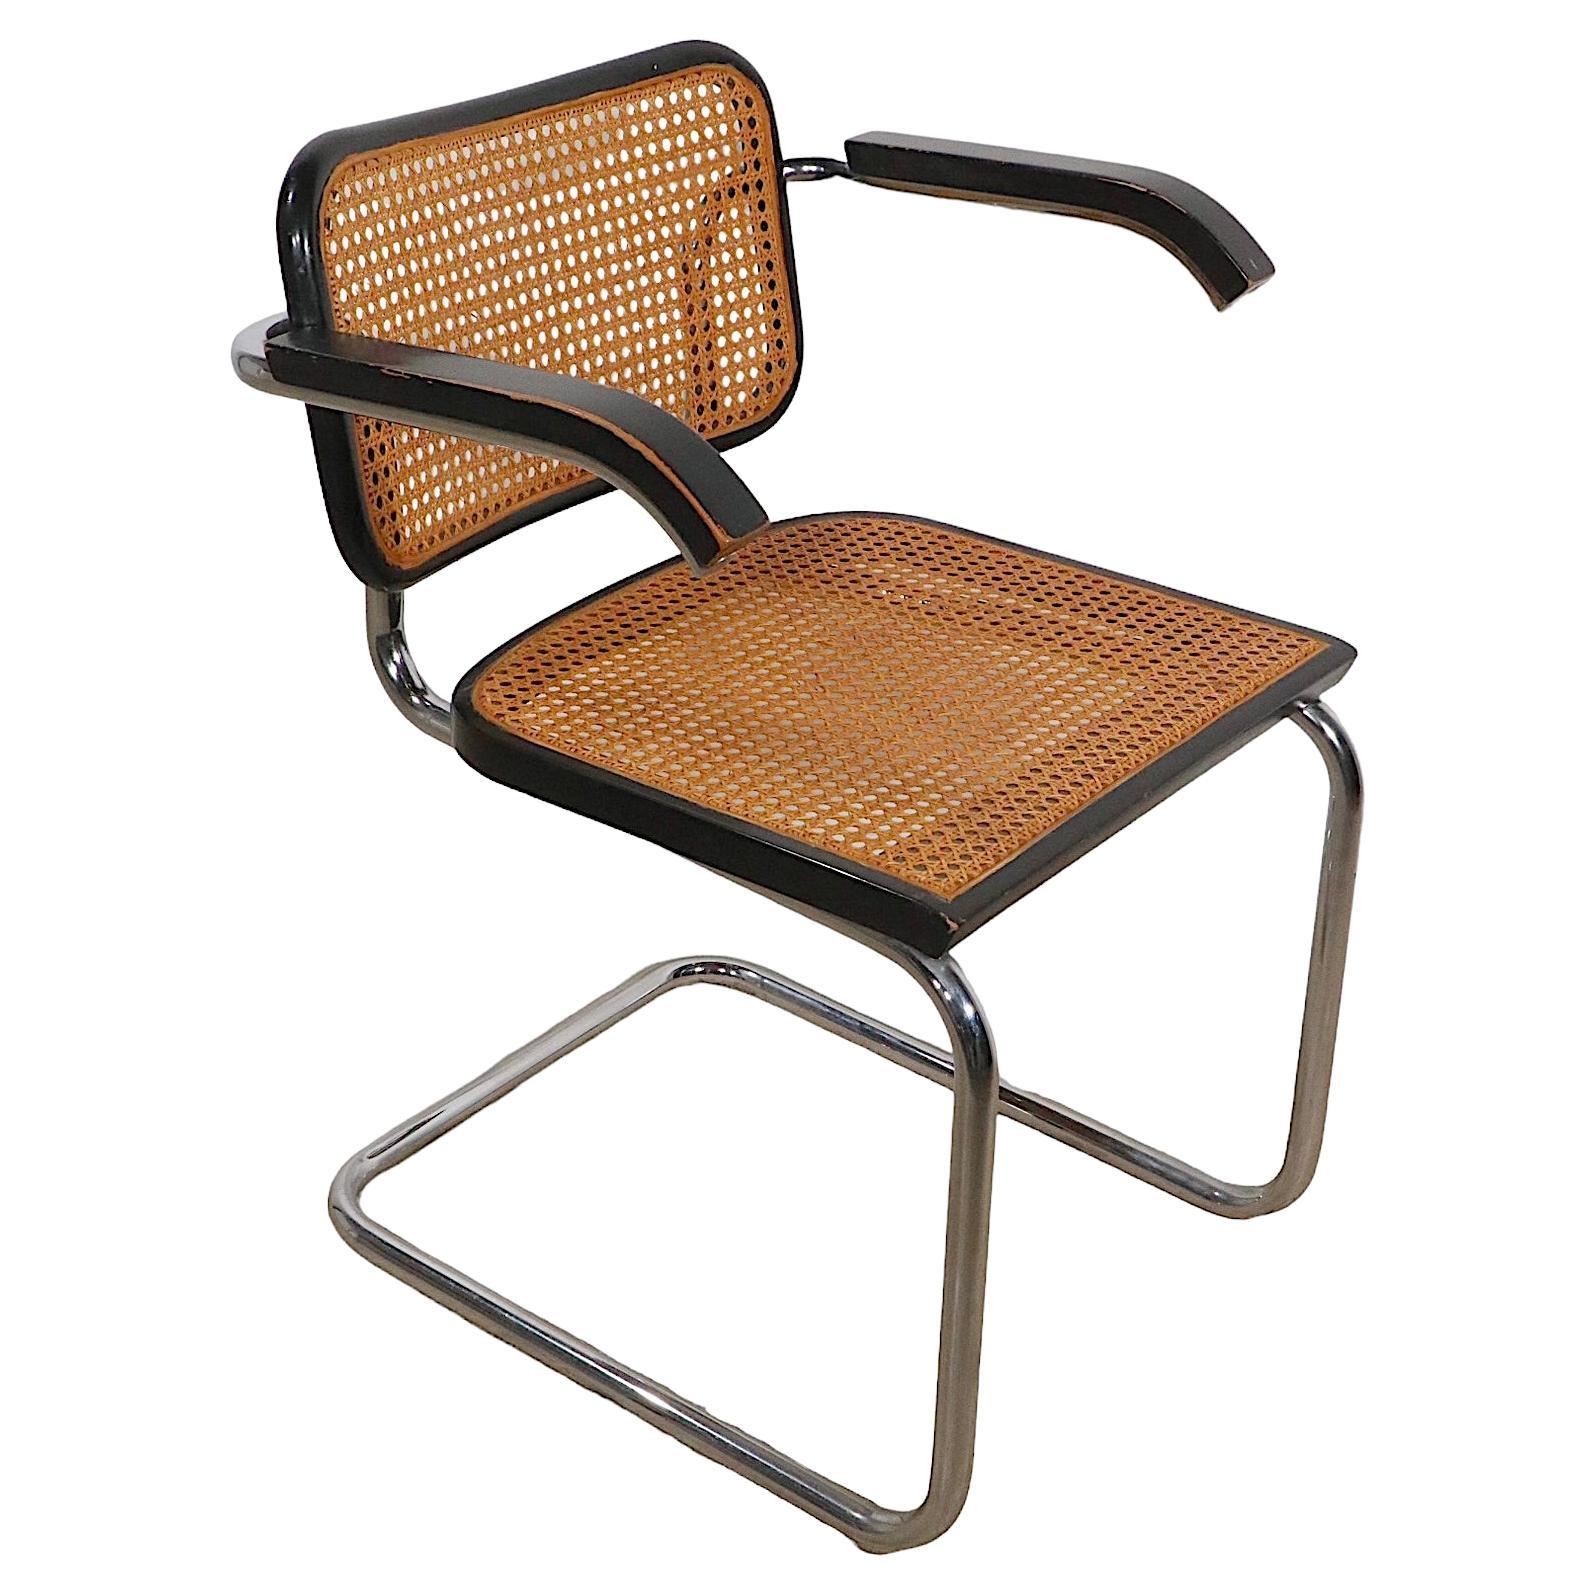 Chrome and Black Cesca Chair Designed by Marcel Breuer Made in Italy circa 1970s